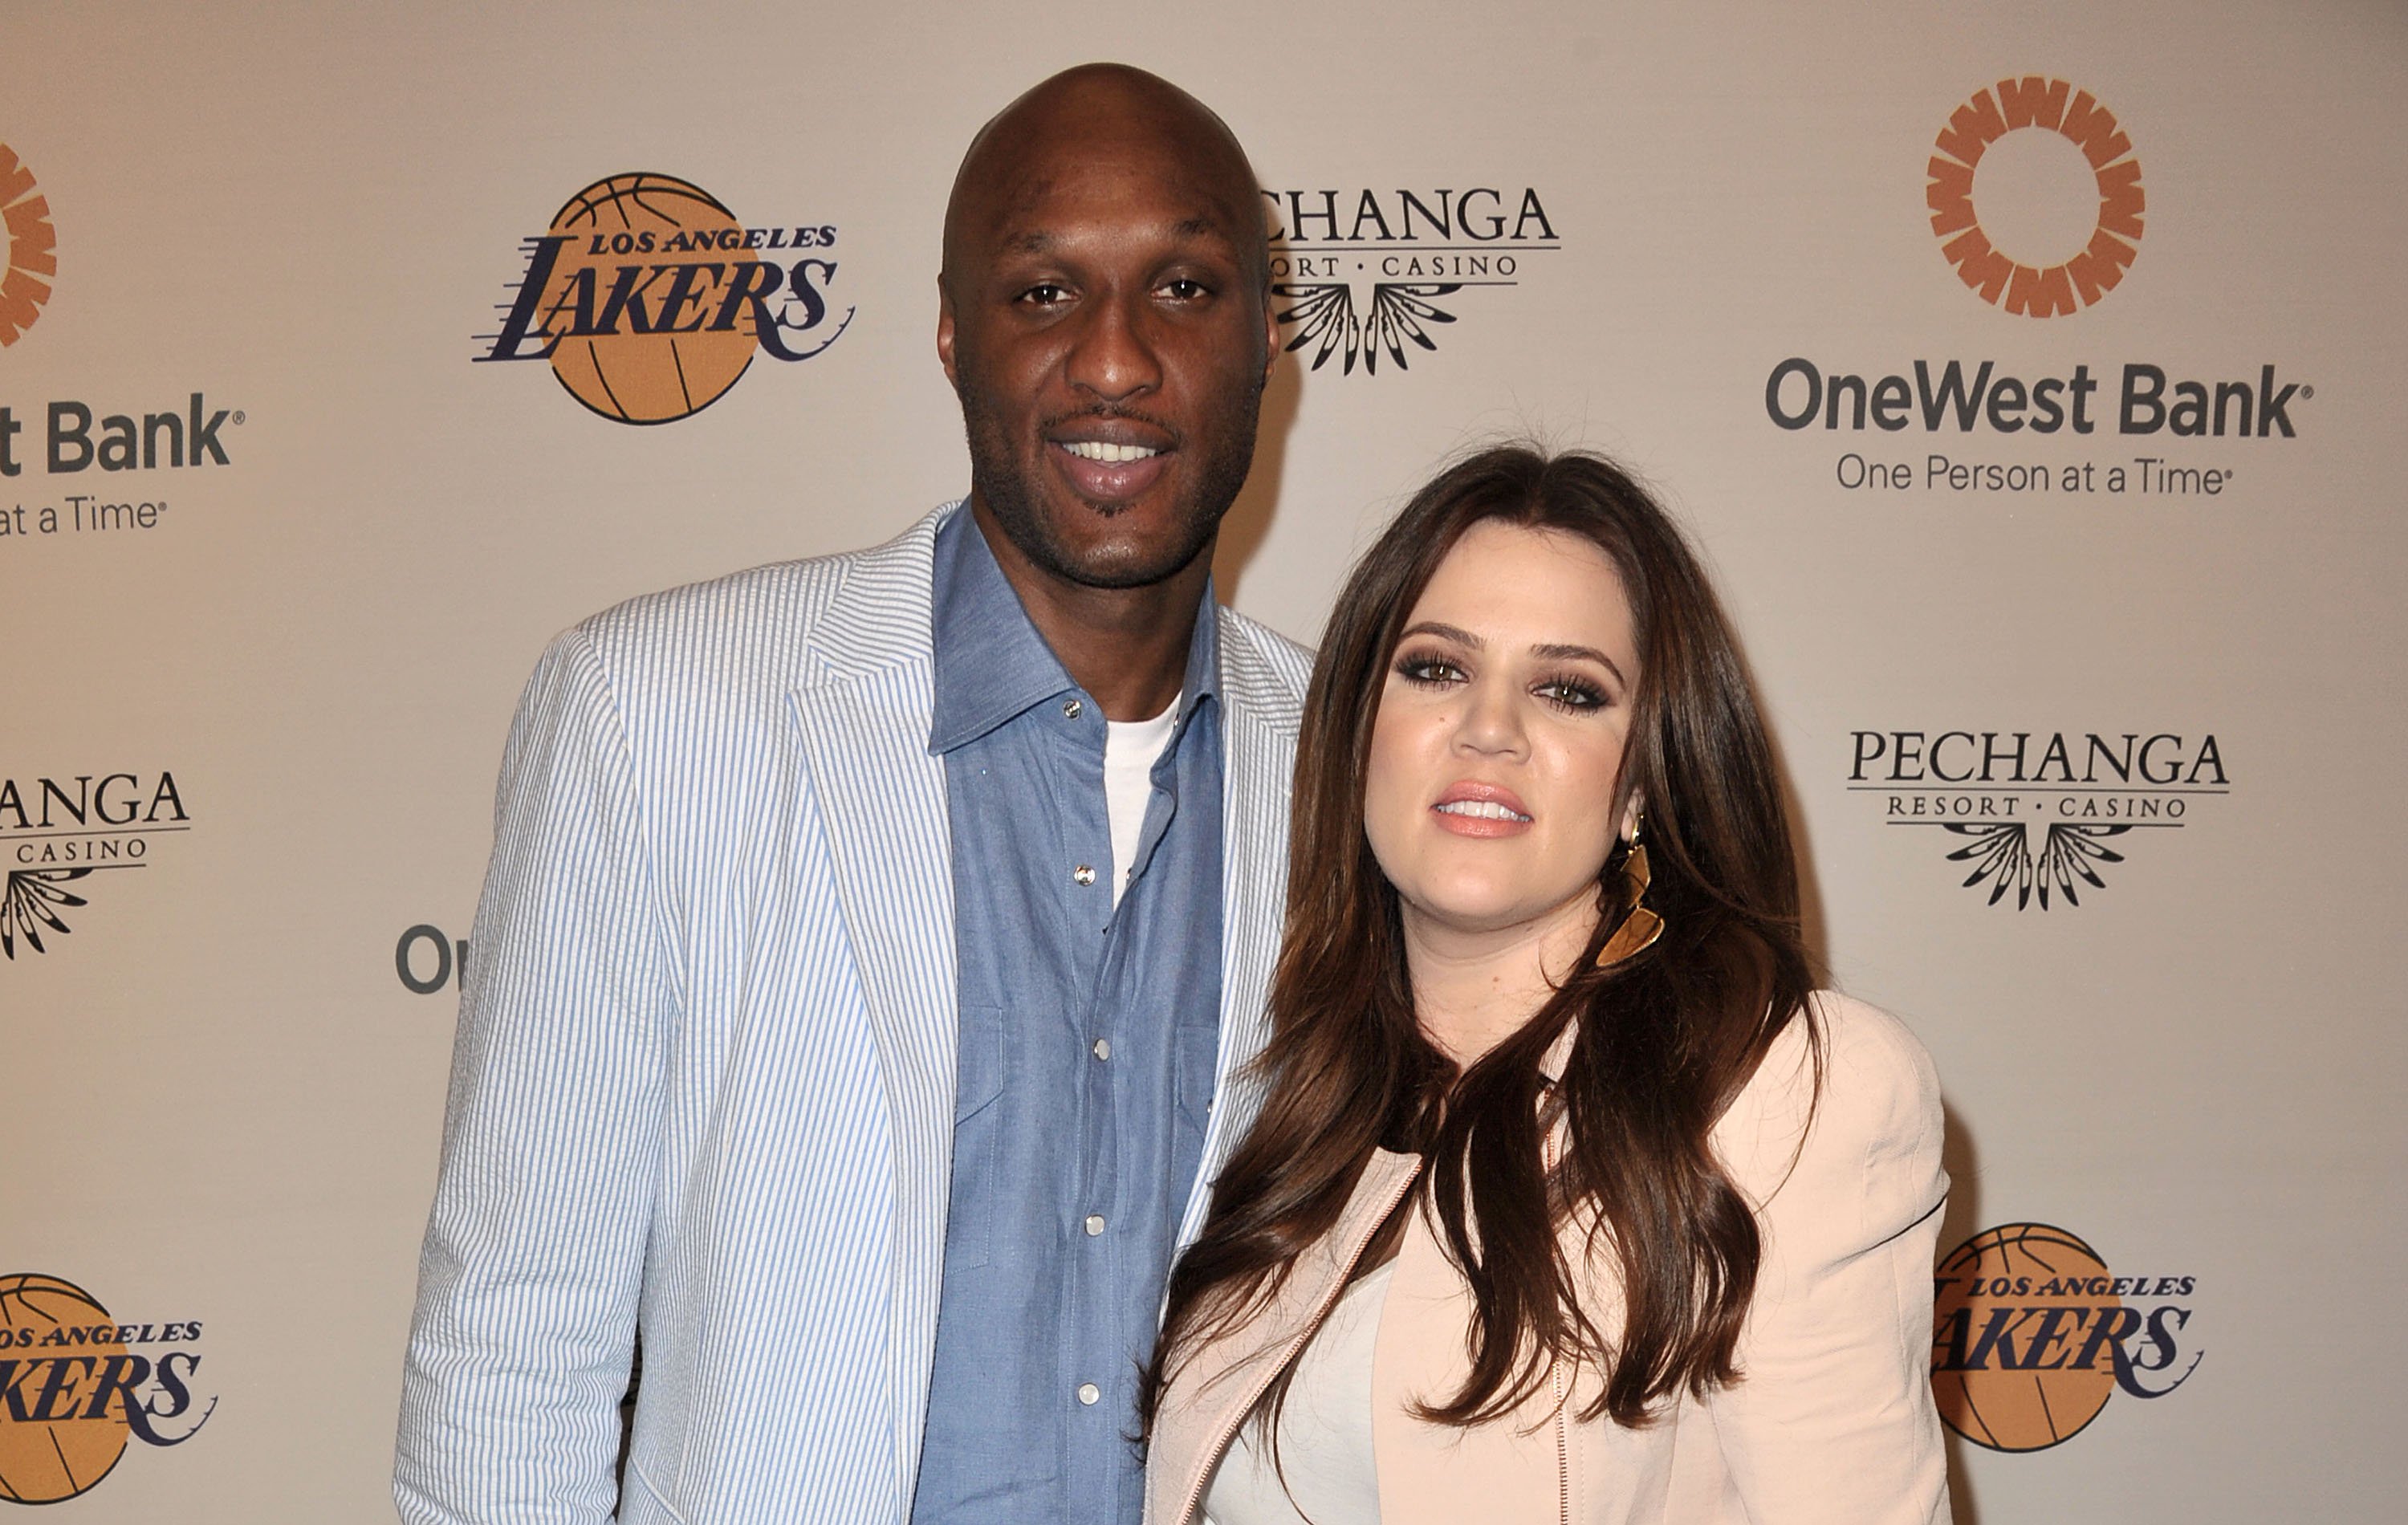 Lamar Odom and Khloe Kardashian attend the Lakers casino night at Staples Center on April 3, 2011 in Los Angeles, California.